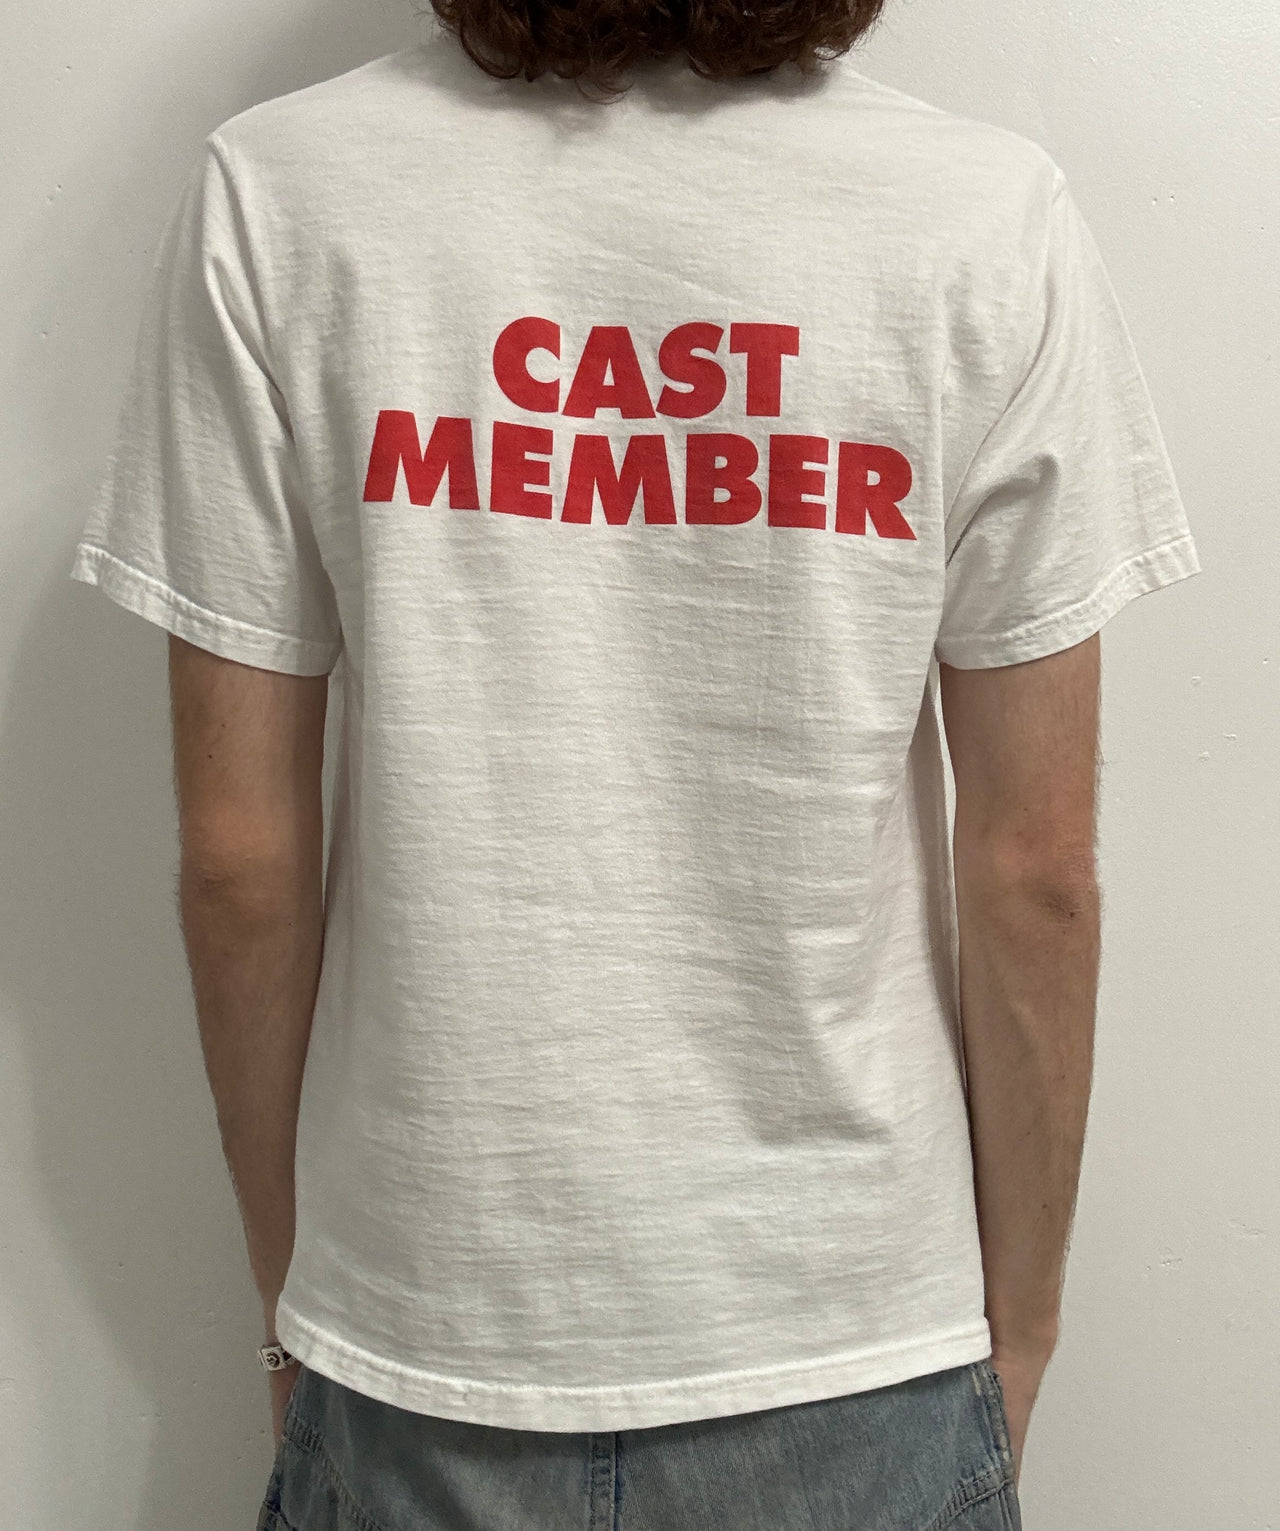 2000s Toy Story 2 Cast Member Promo Tee